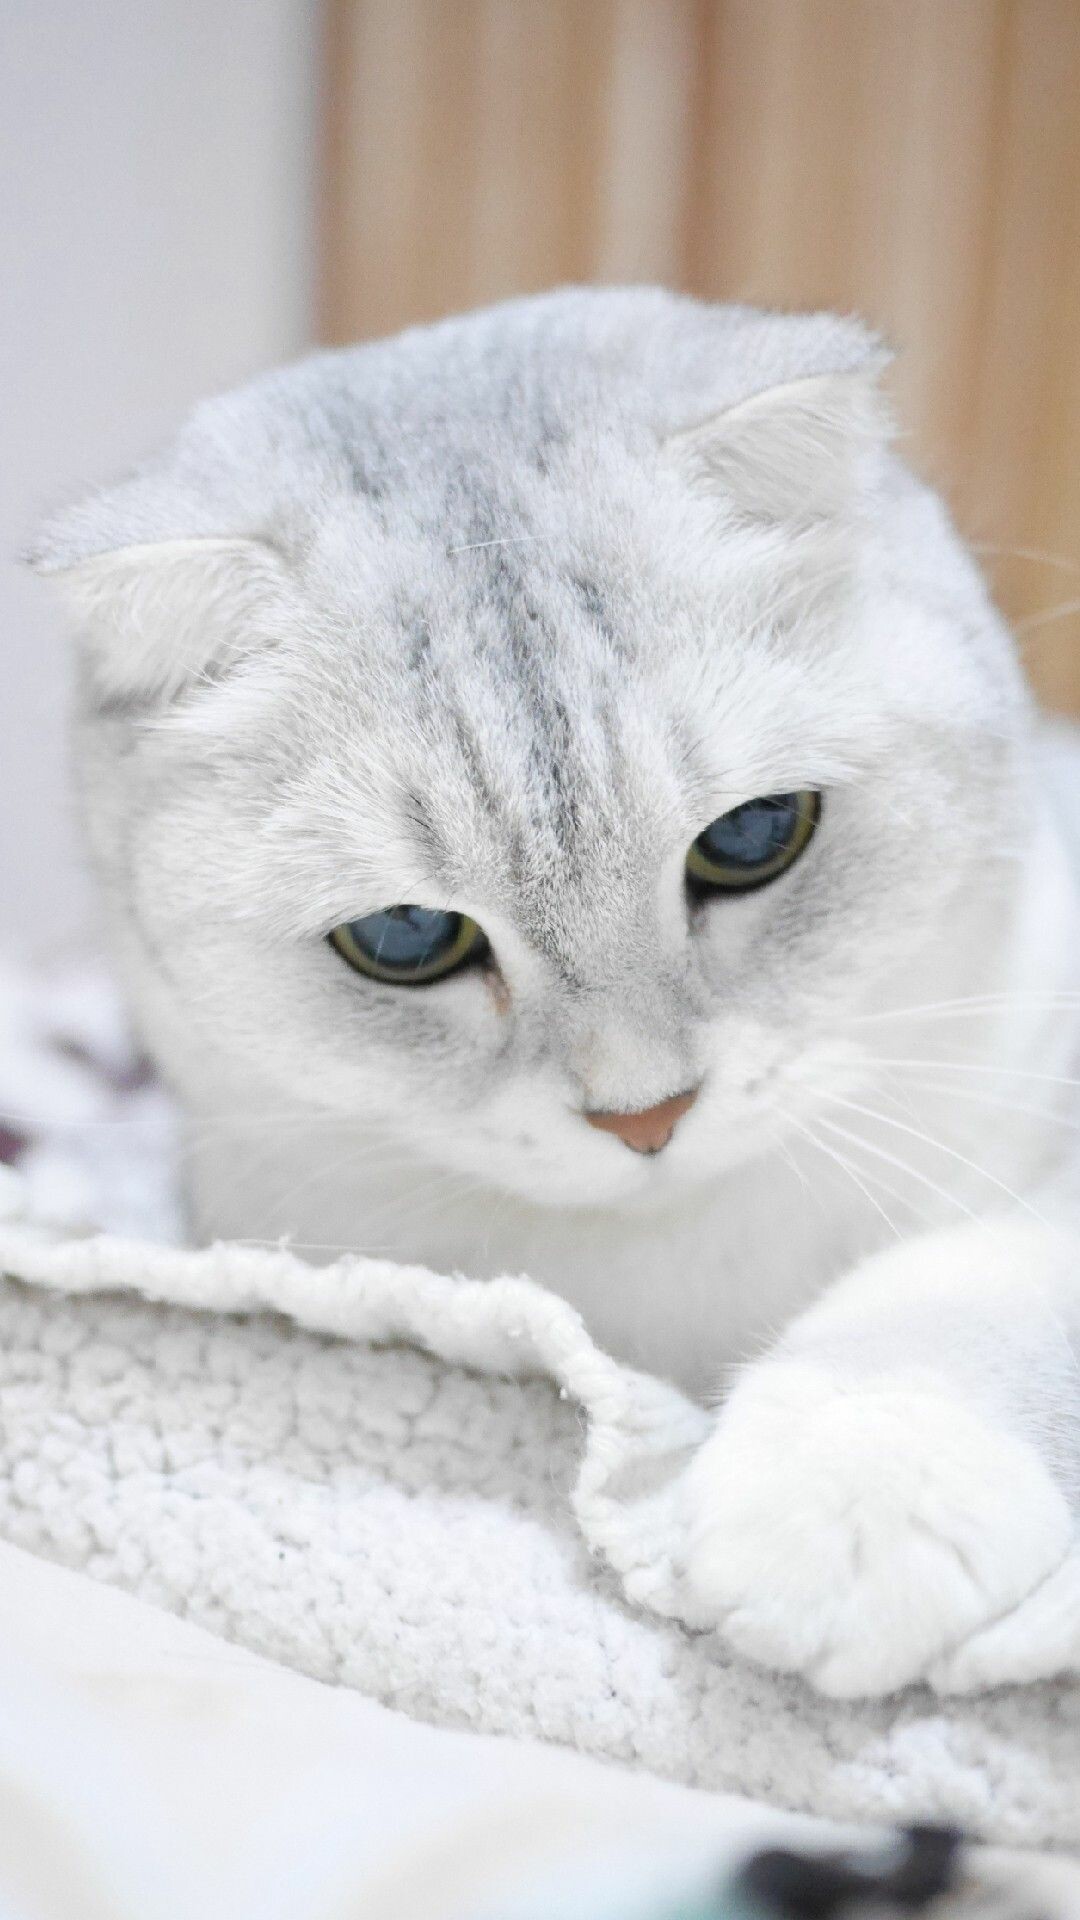 Scottish Fold: Folded ears are the most unusual feature of a cat breed, but its general appearance is also notably round. 1080x1920 Full HD Background.